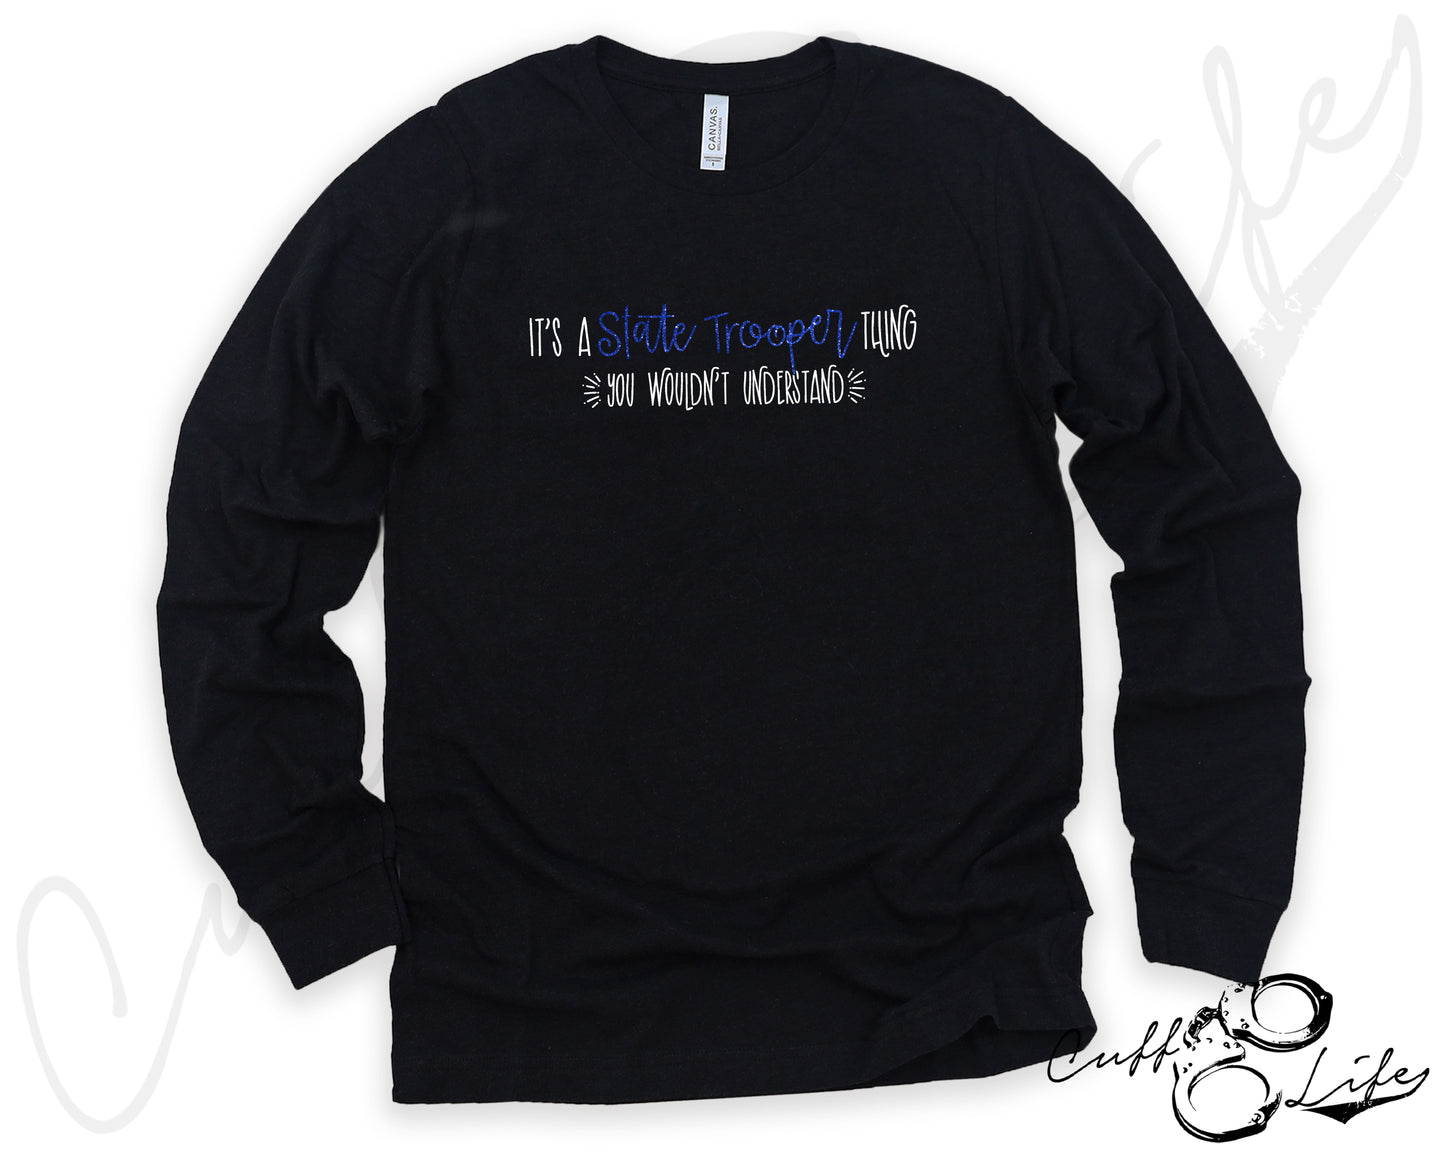 It's a State Trooper Thing © - Long Sleeve Tee